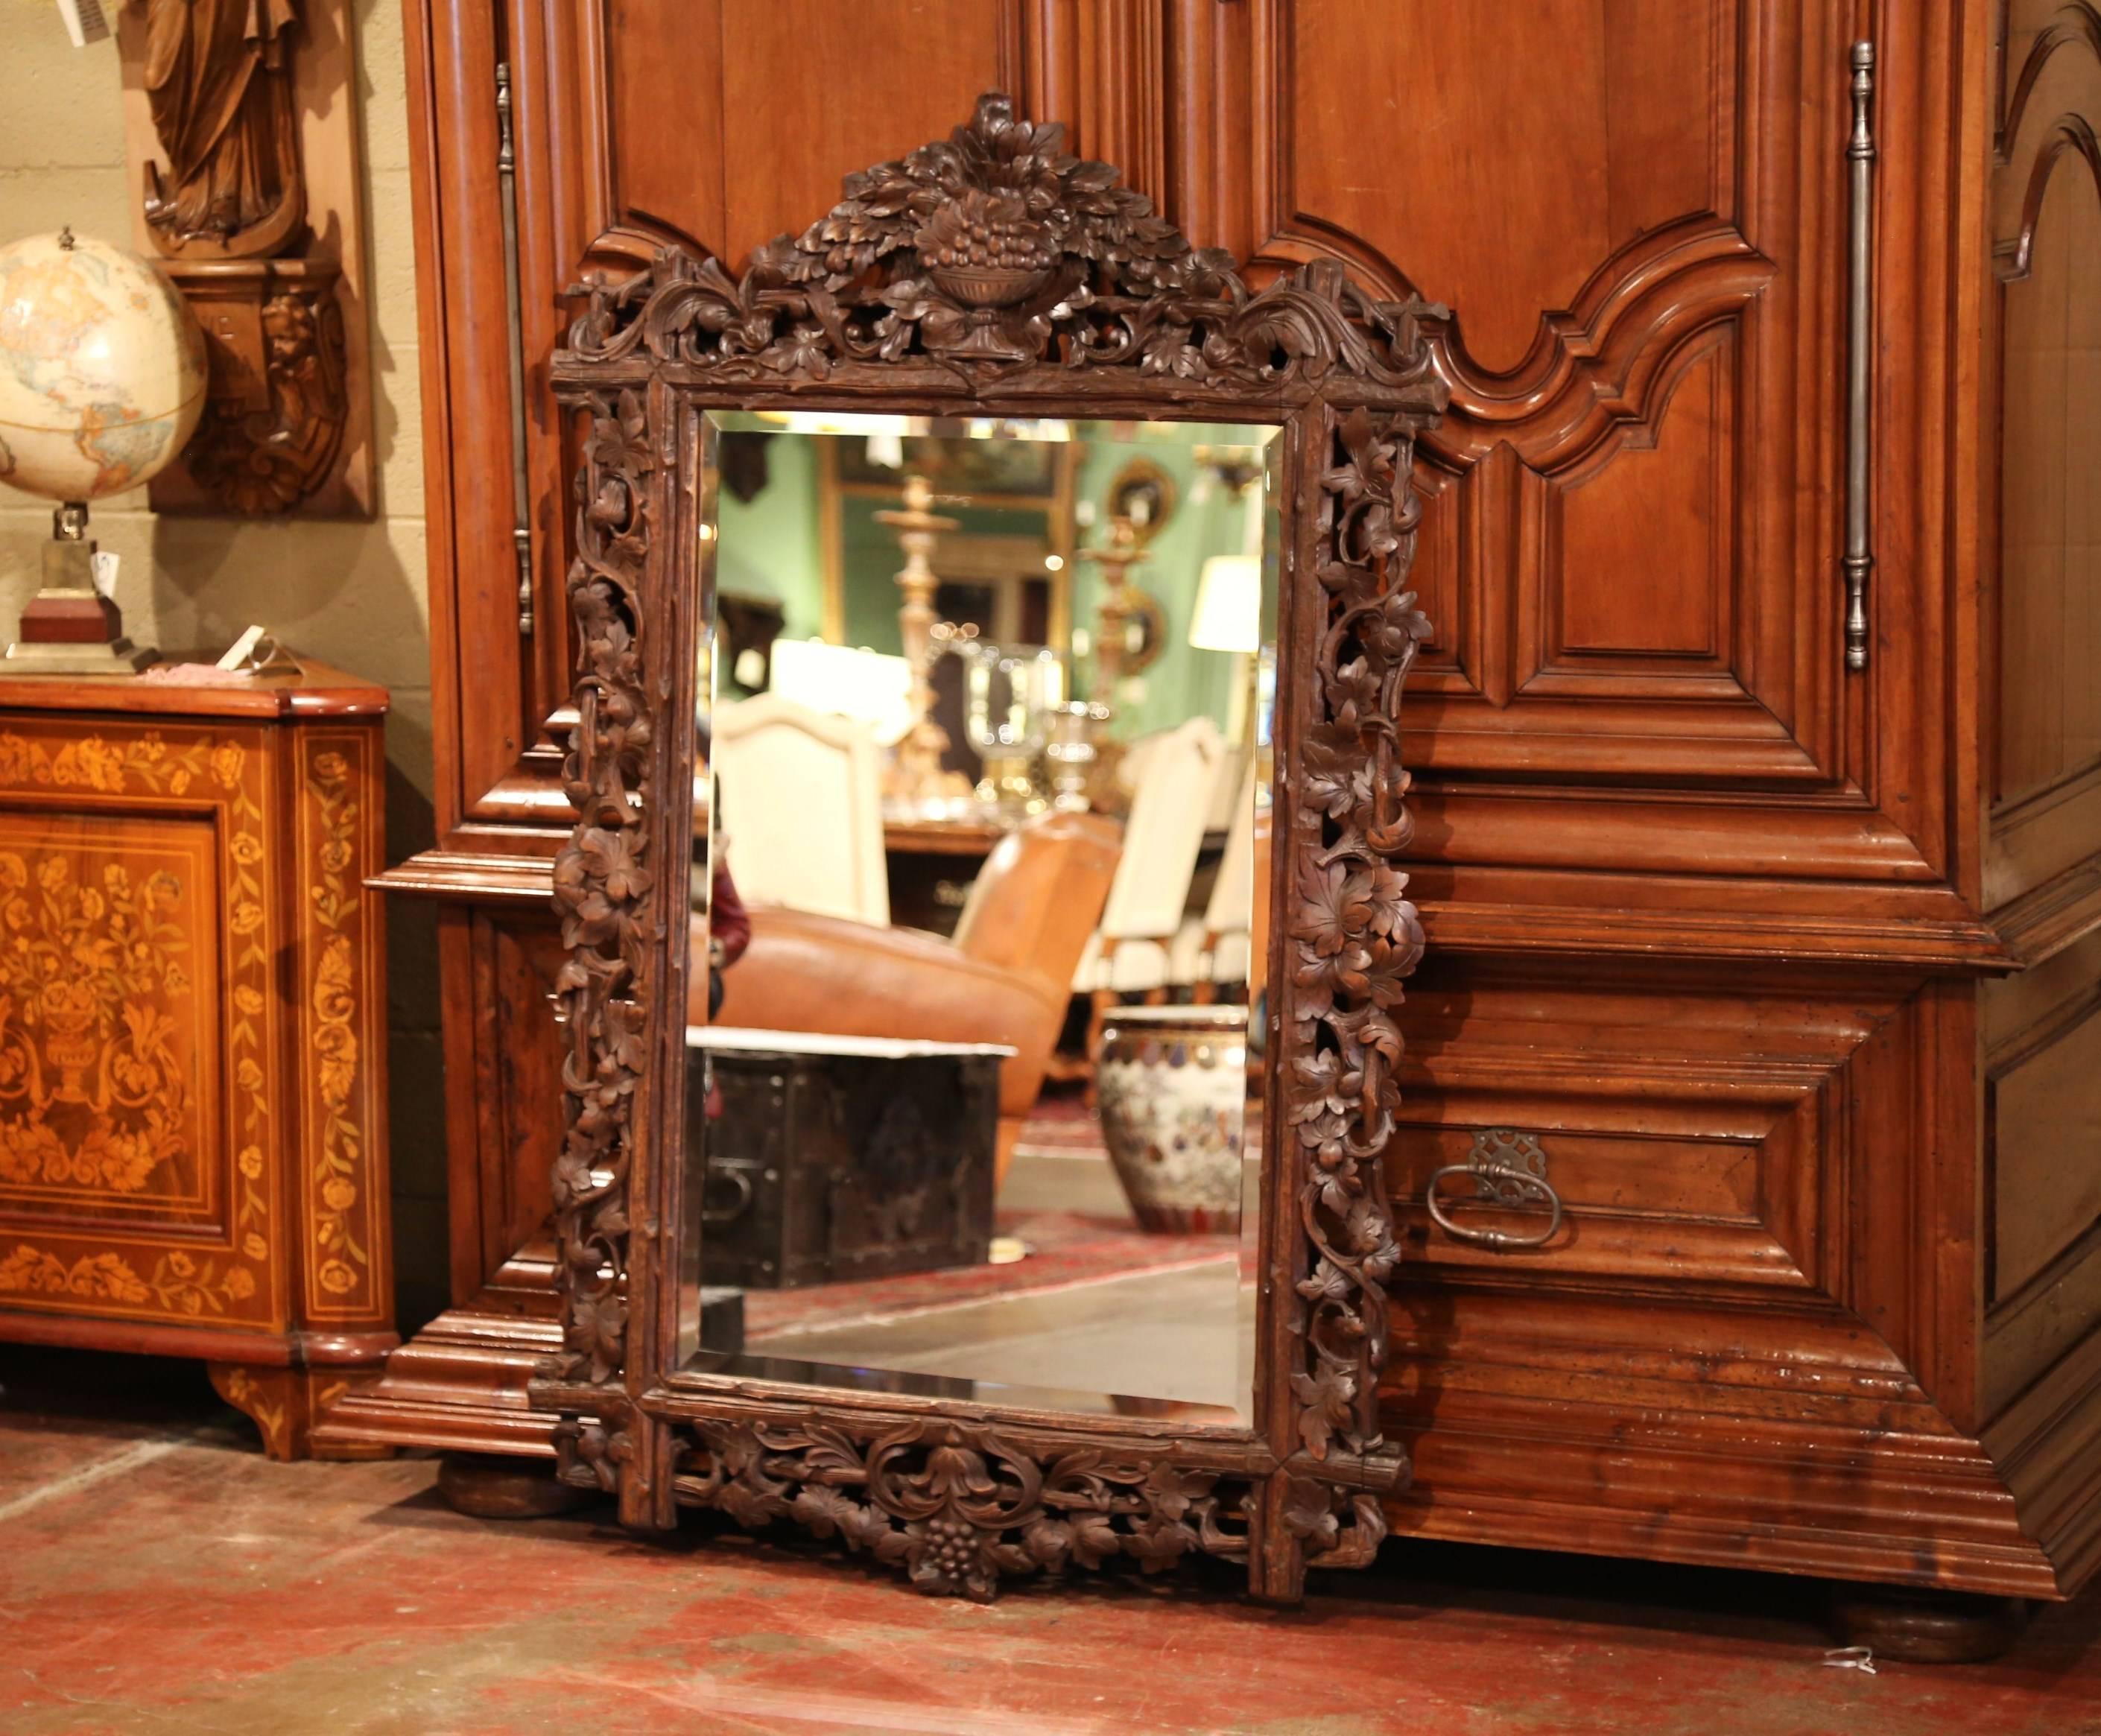 This large antique wall mirror was crafted in the Alps of France, circa 1870. The hand carved fruit wood mirror features a vase full with grapes and leaves at the pediment, with foliage and tree branches all the way around the frame. The impressive,